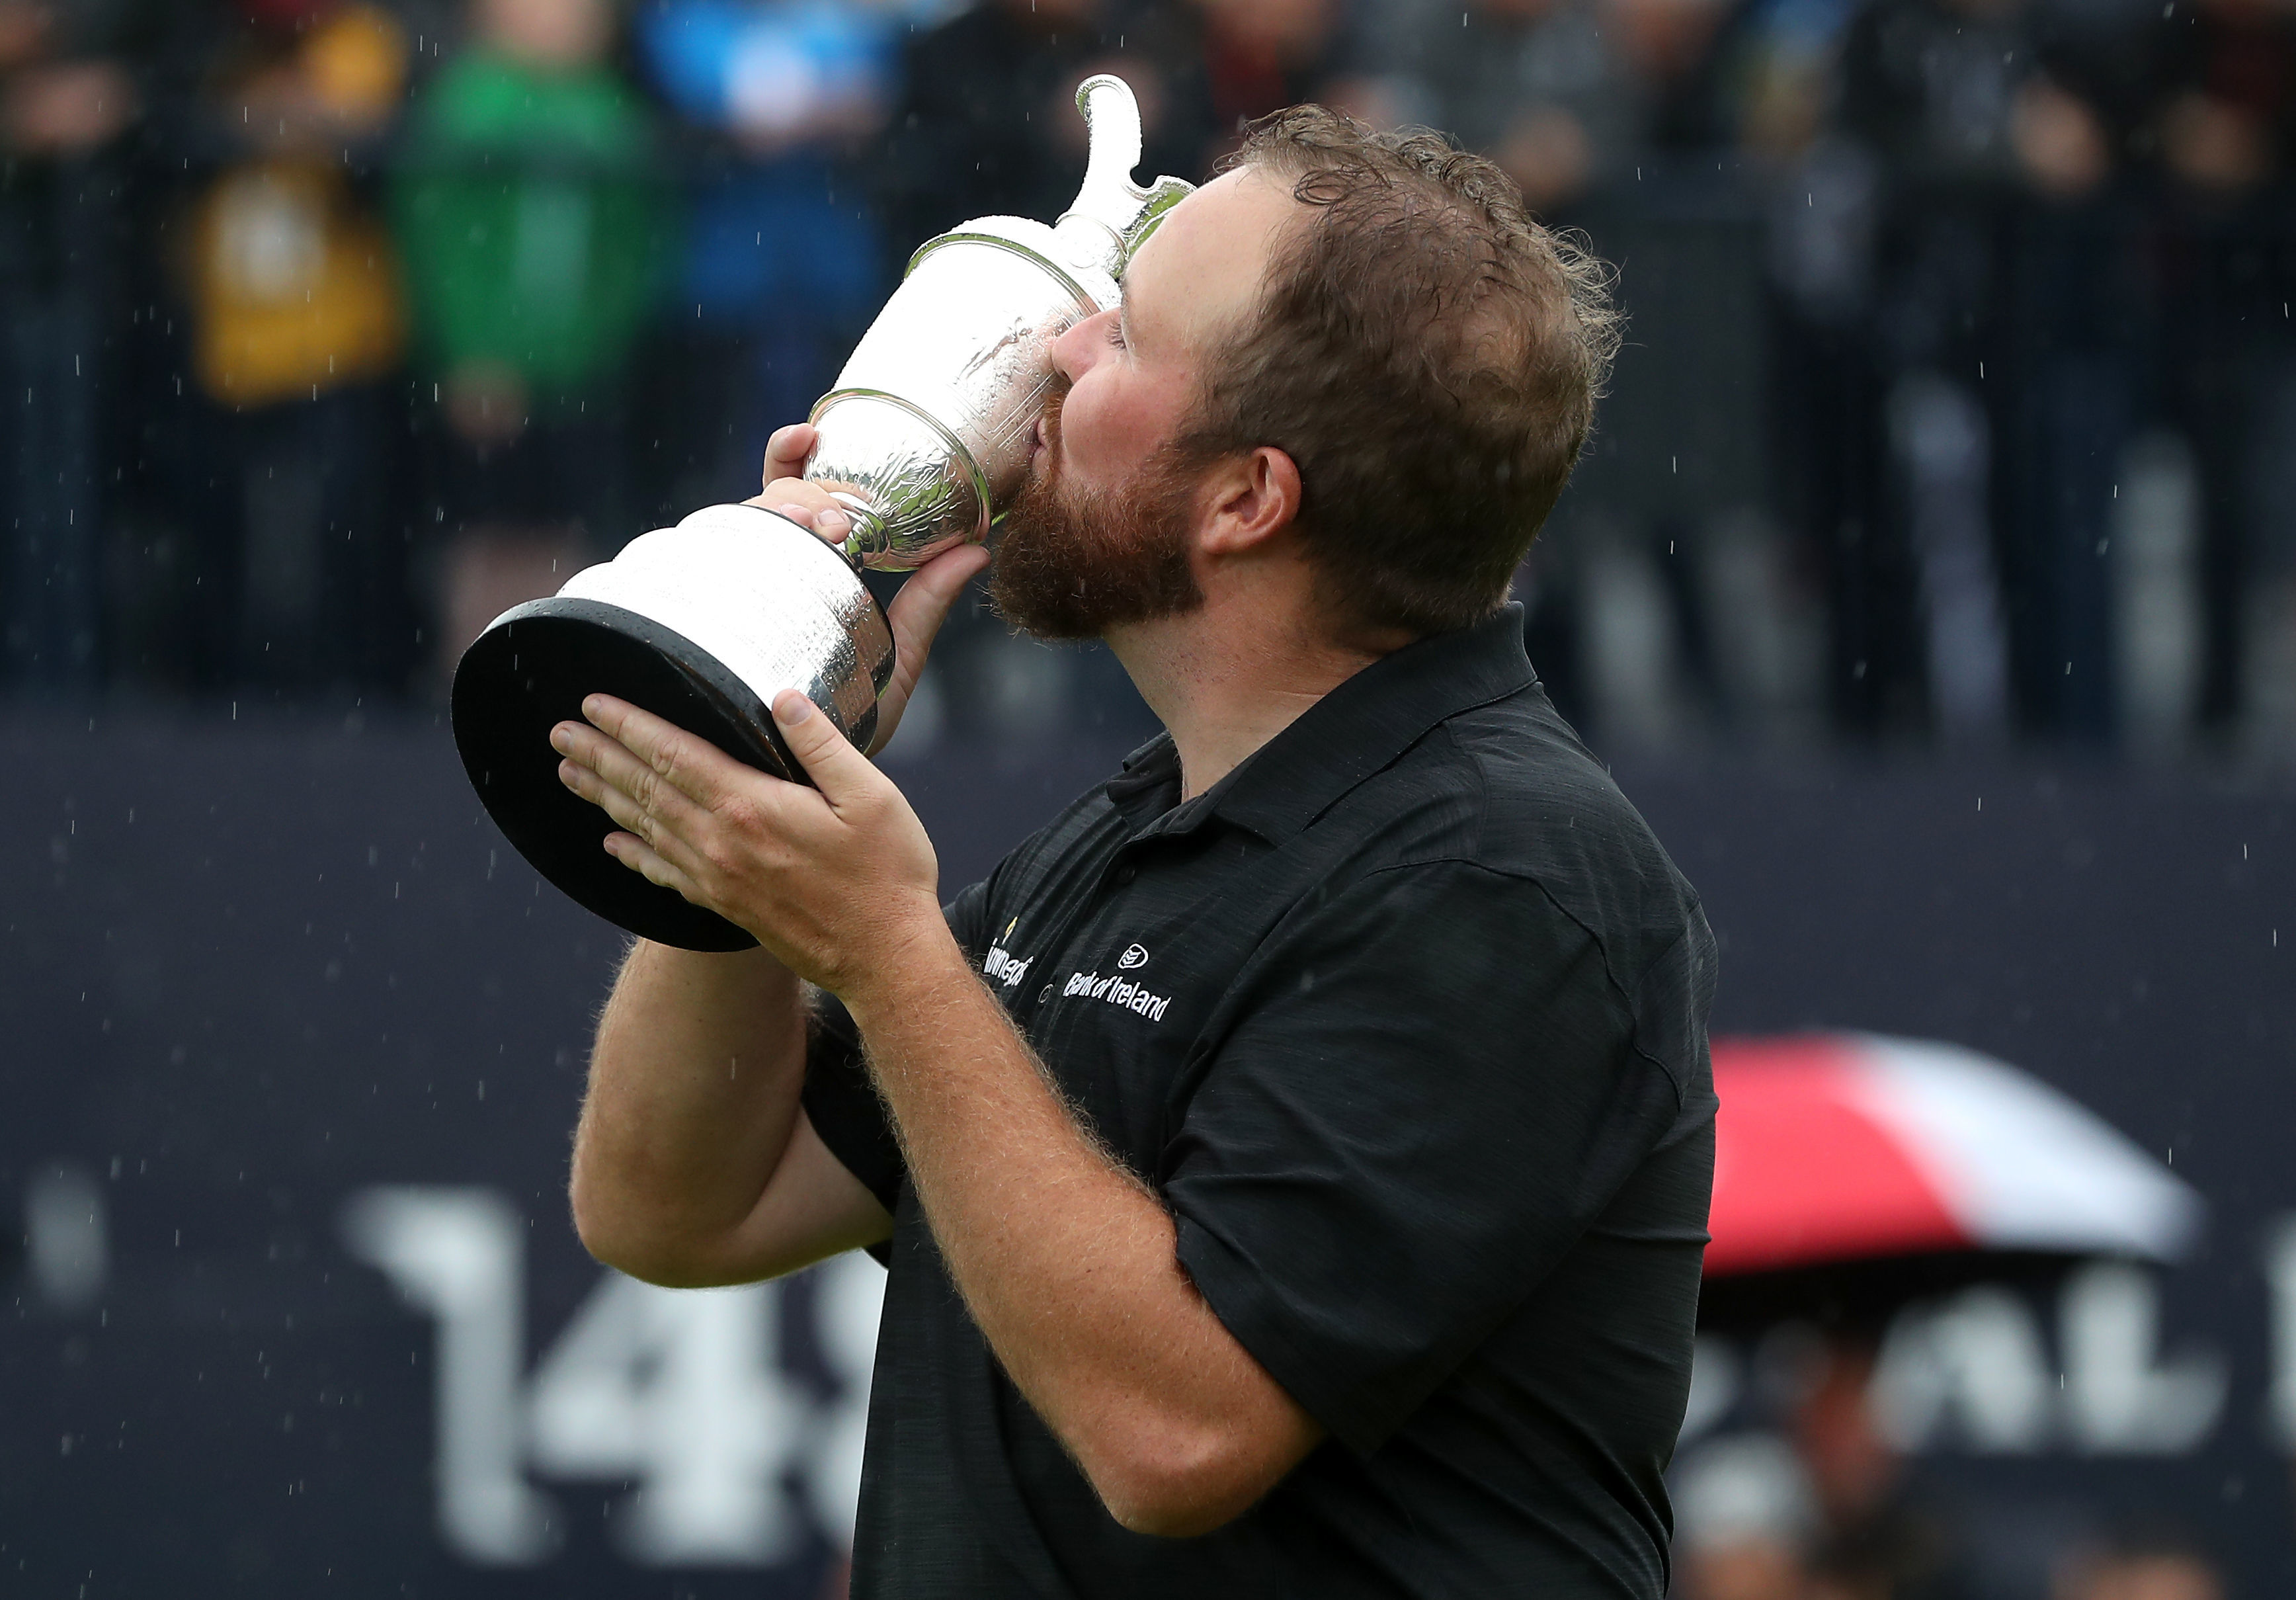 Shane Lowry was scheduled to defend the Claret Jug in July.